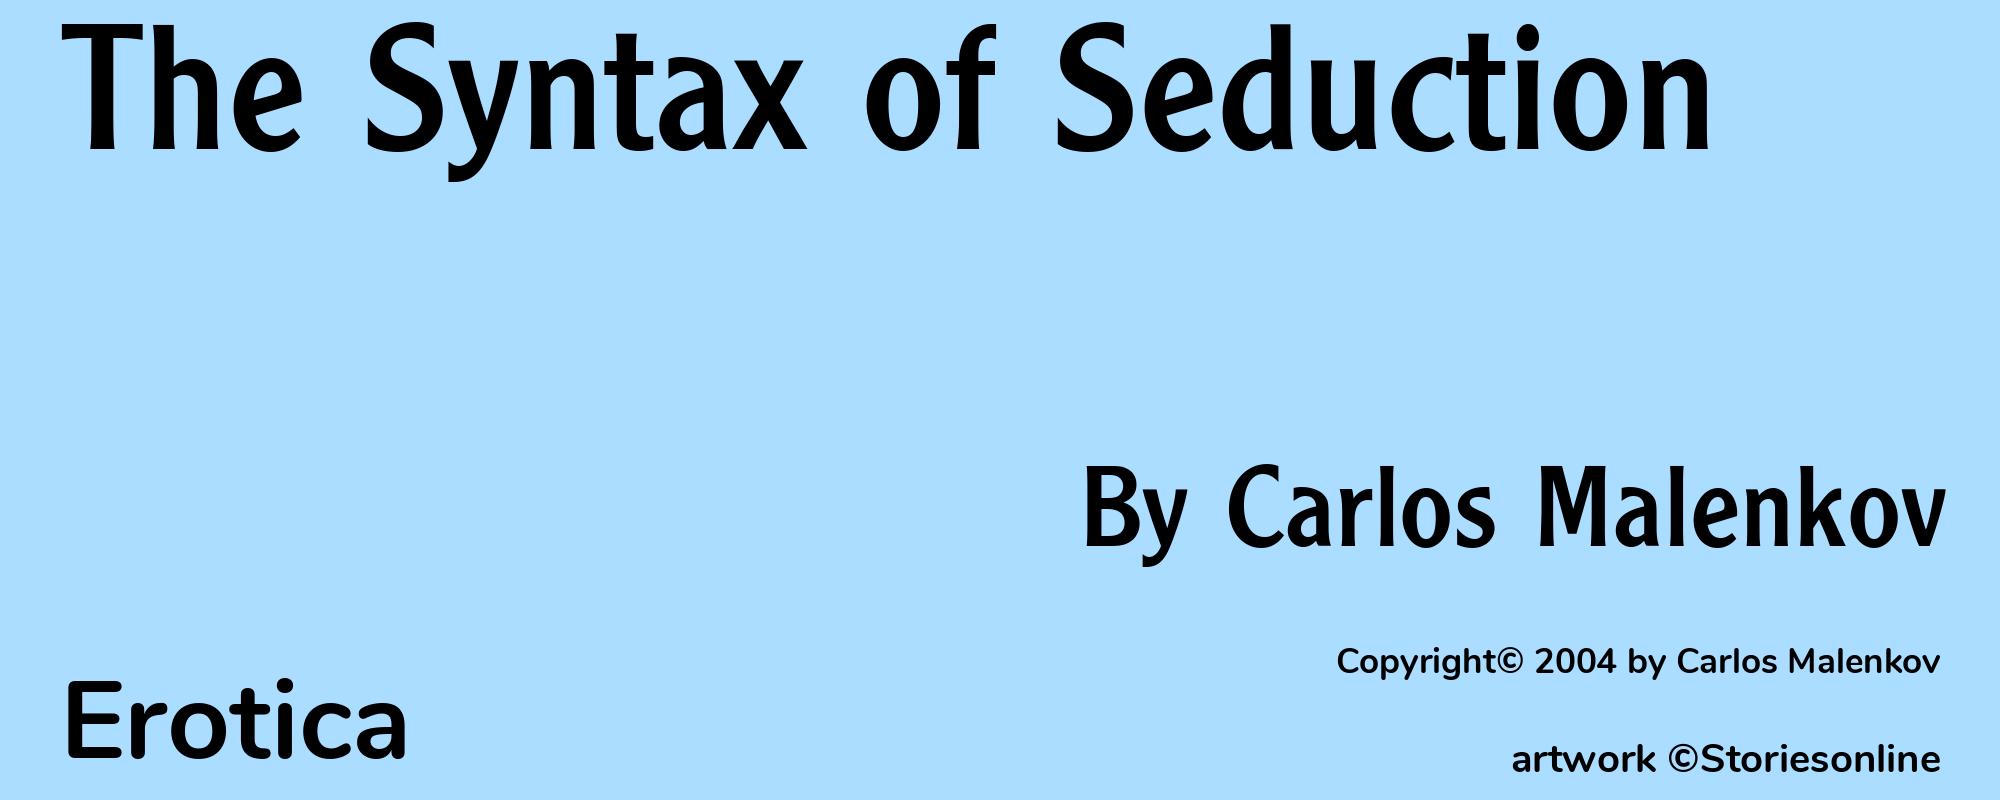 The Syntax of Seduction - Cover